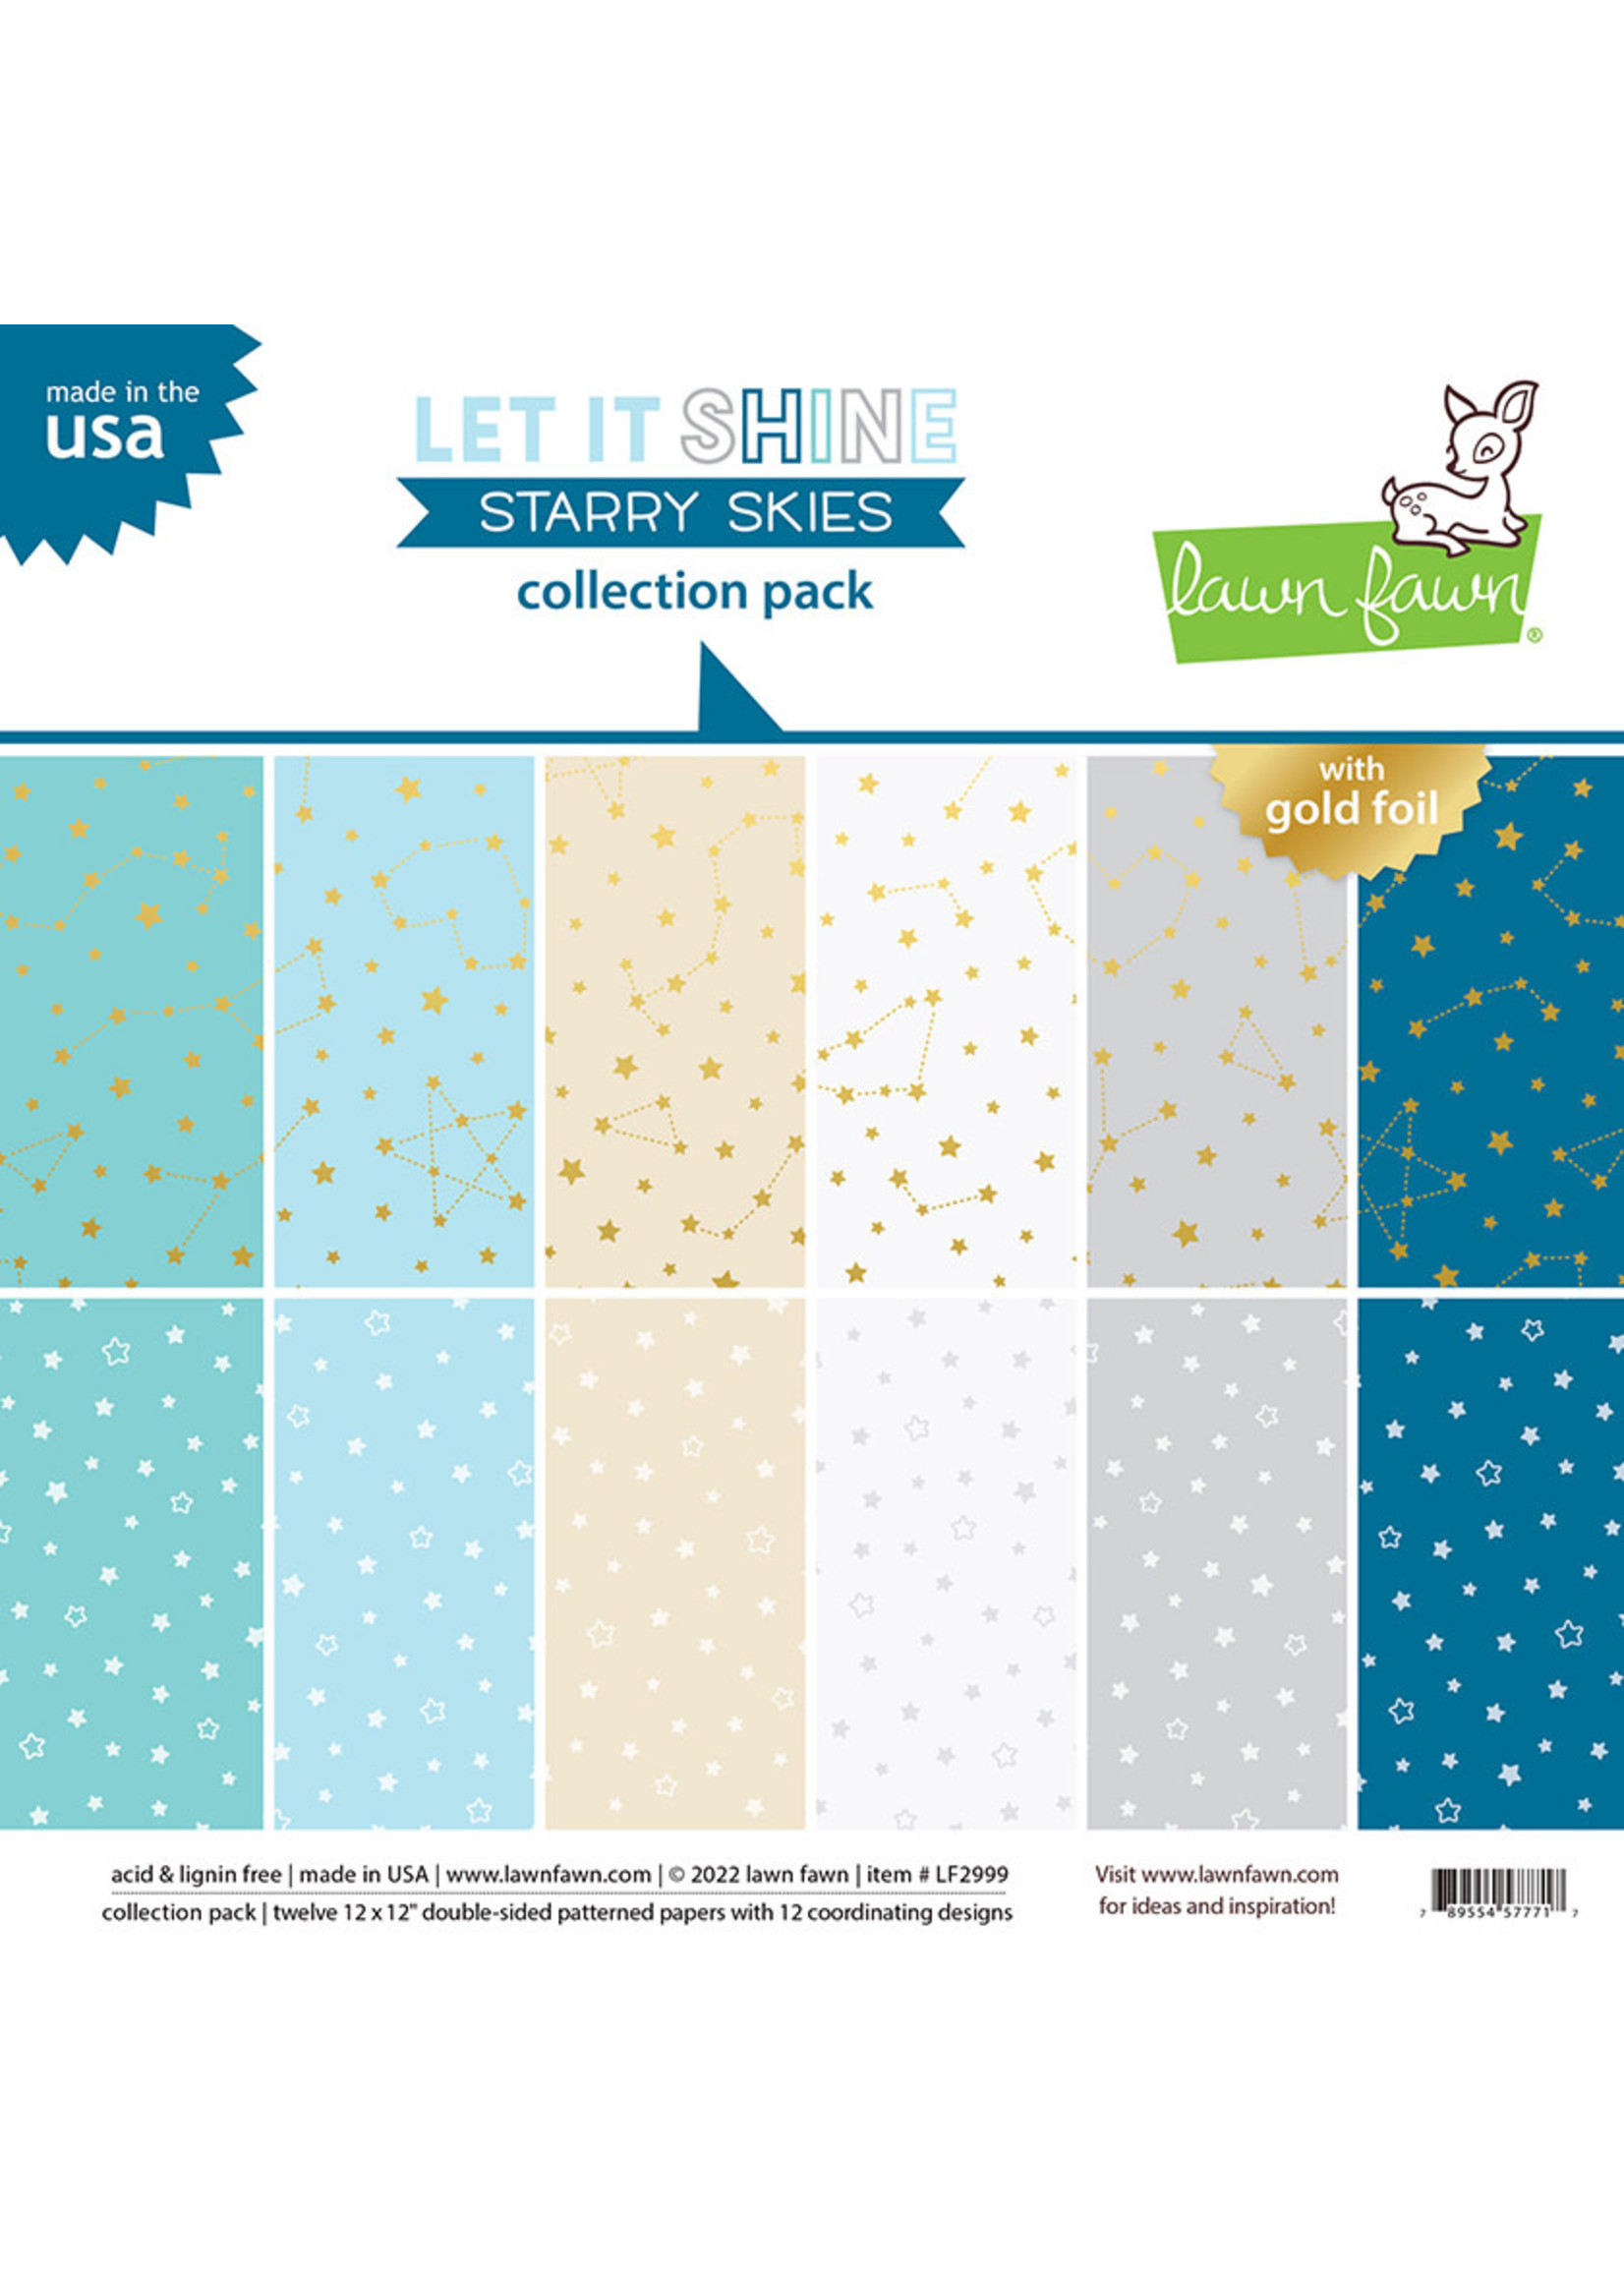 Lawn Fawn let it shine starry skies collection pack